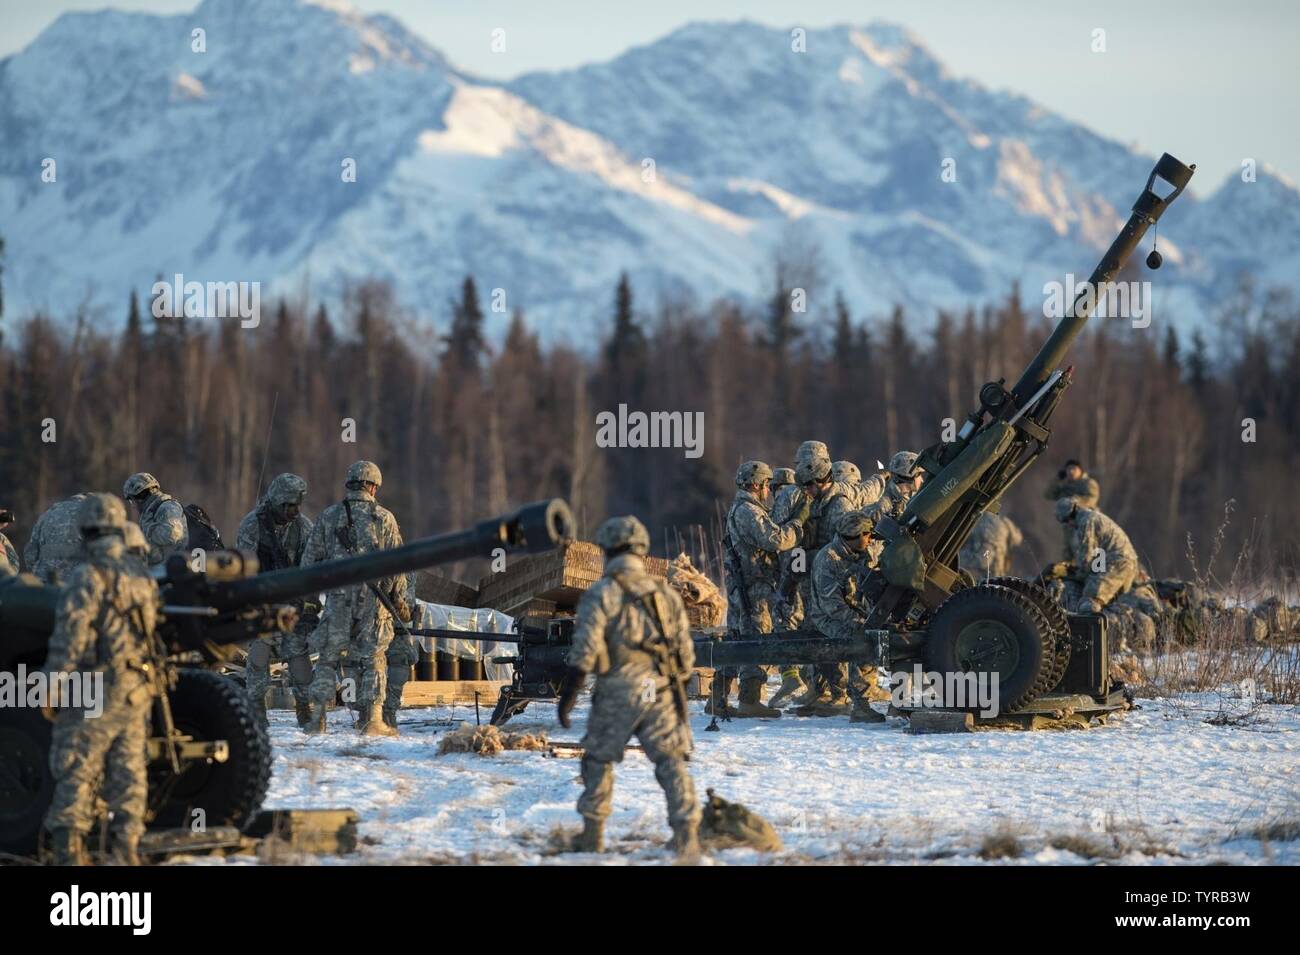 Paratroopers assigned to A Battery, 2nd Battalion, 377th Parachute Field Artillery Regiment, 4th Infantry Brigade Combat Team (Airborne), 25th Infantry Division, U.S. Army Alaska, prepare to fire 105 mm howitzers during airborne and live fire training at Joint Base Elmendorf-Richardson, Alaska, Nov. 22, 2016. Following a heavy equipment drop and parachute assault, the paratroopers honed their skills by setting up and firing a 105 mm howitzer. The Soldiers of 4/25 IBCT belong to the only American airborne brigade in the Pacific and are trained to execute airborne maneuvers in extreme cold weath Stock Photo